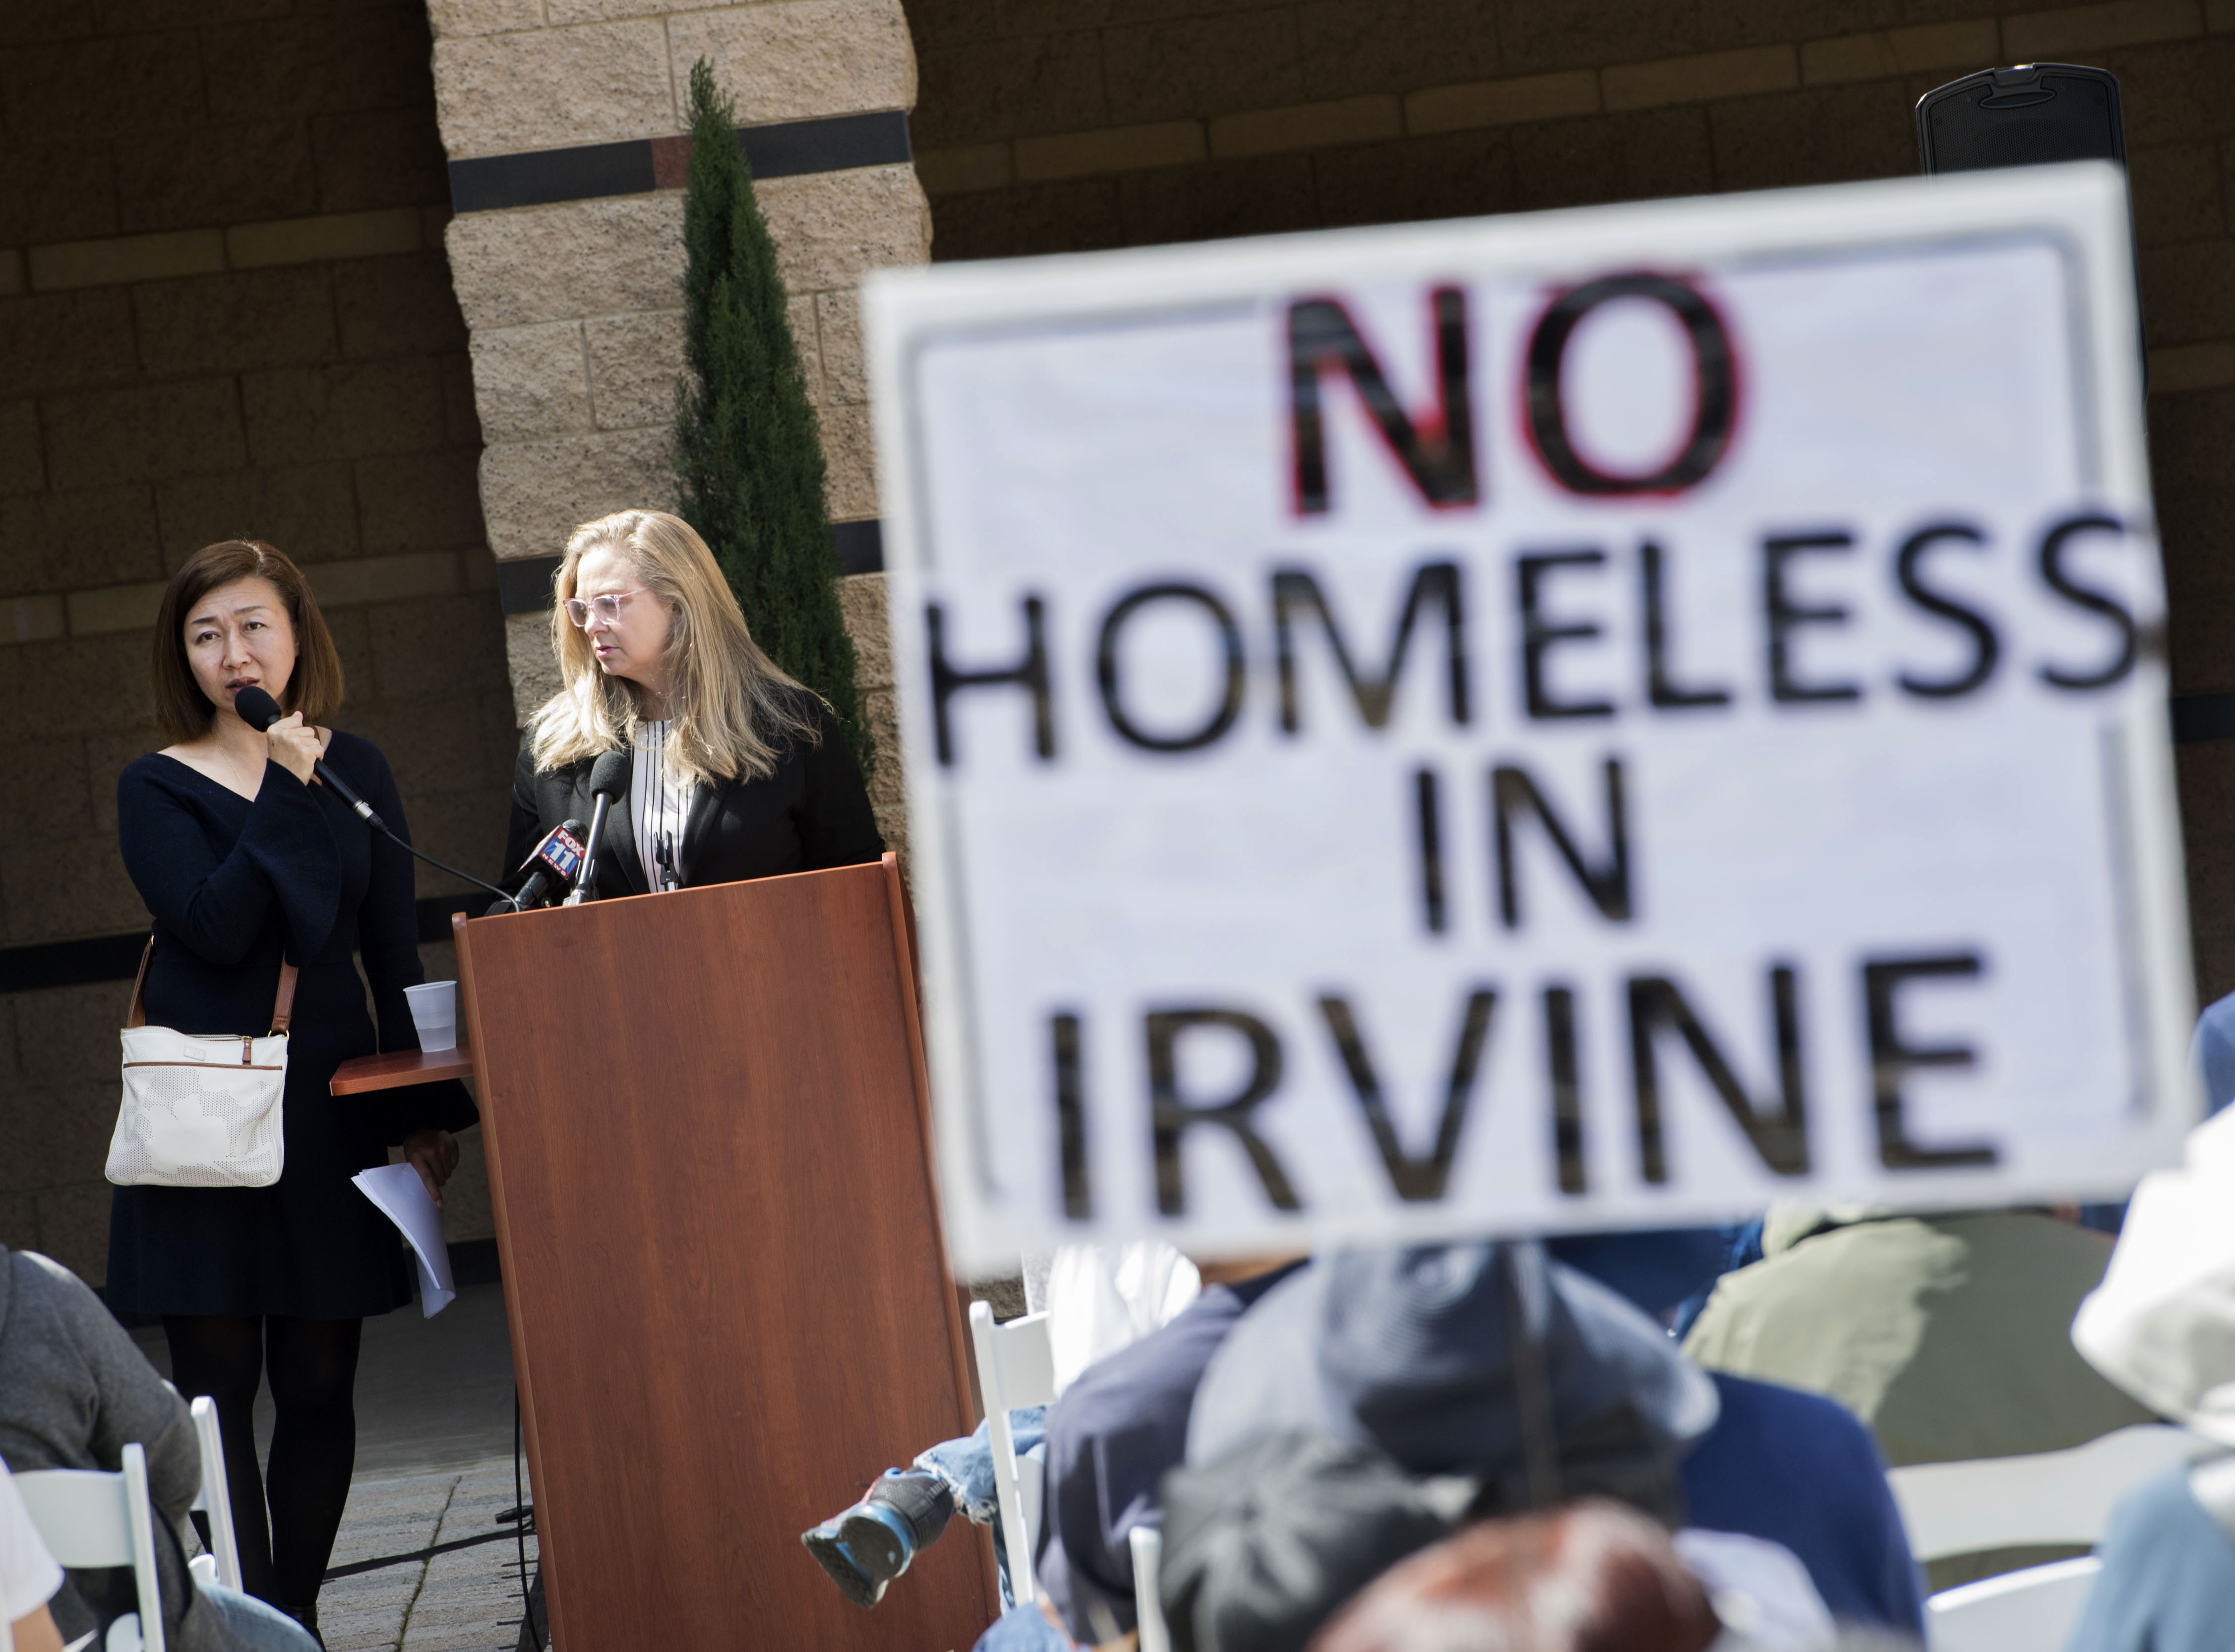 Irvine residents oppose proposed homeless camp next to Great Park